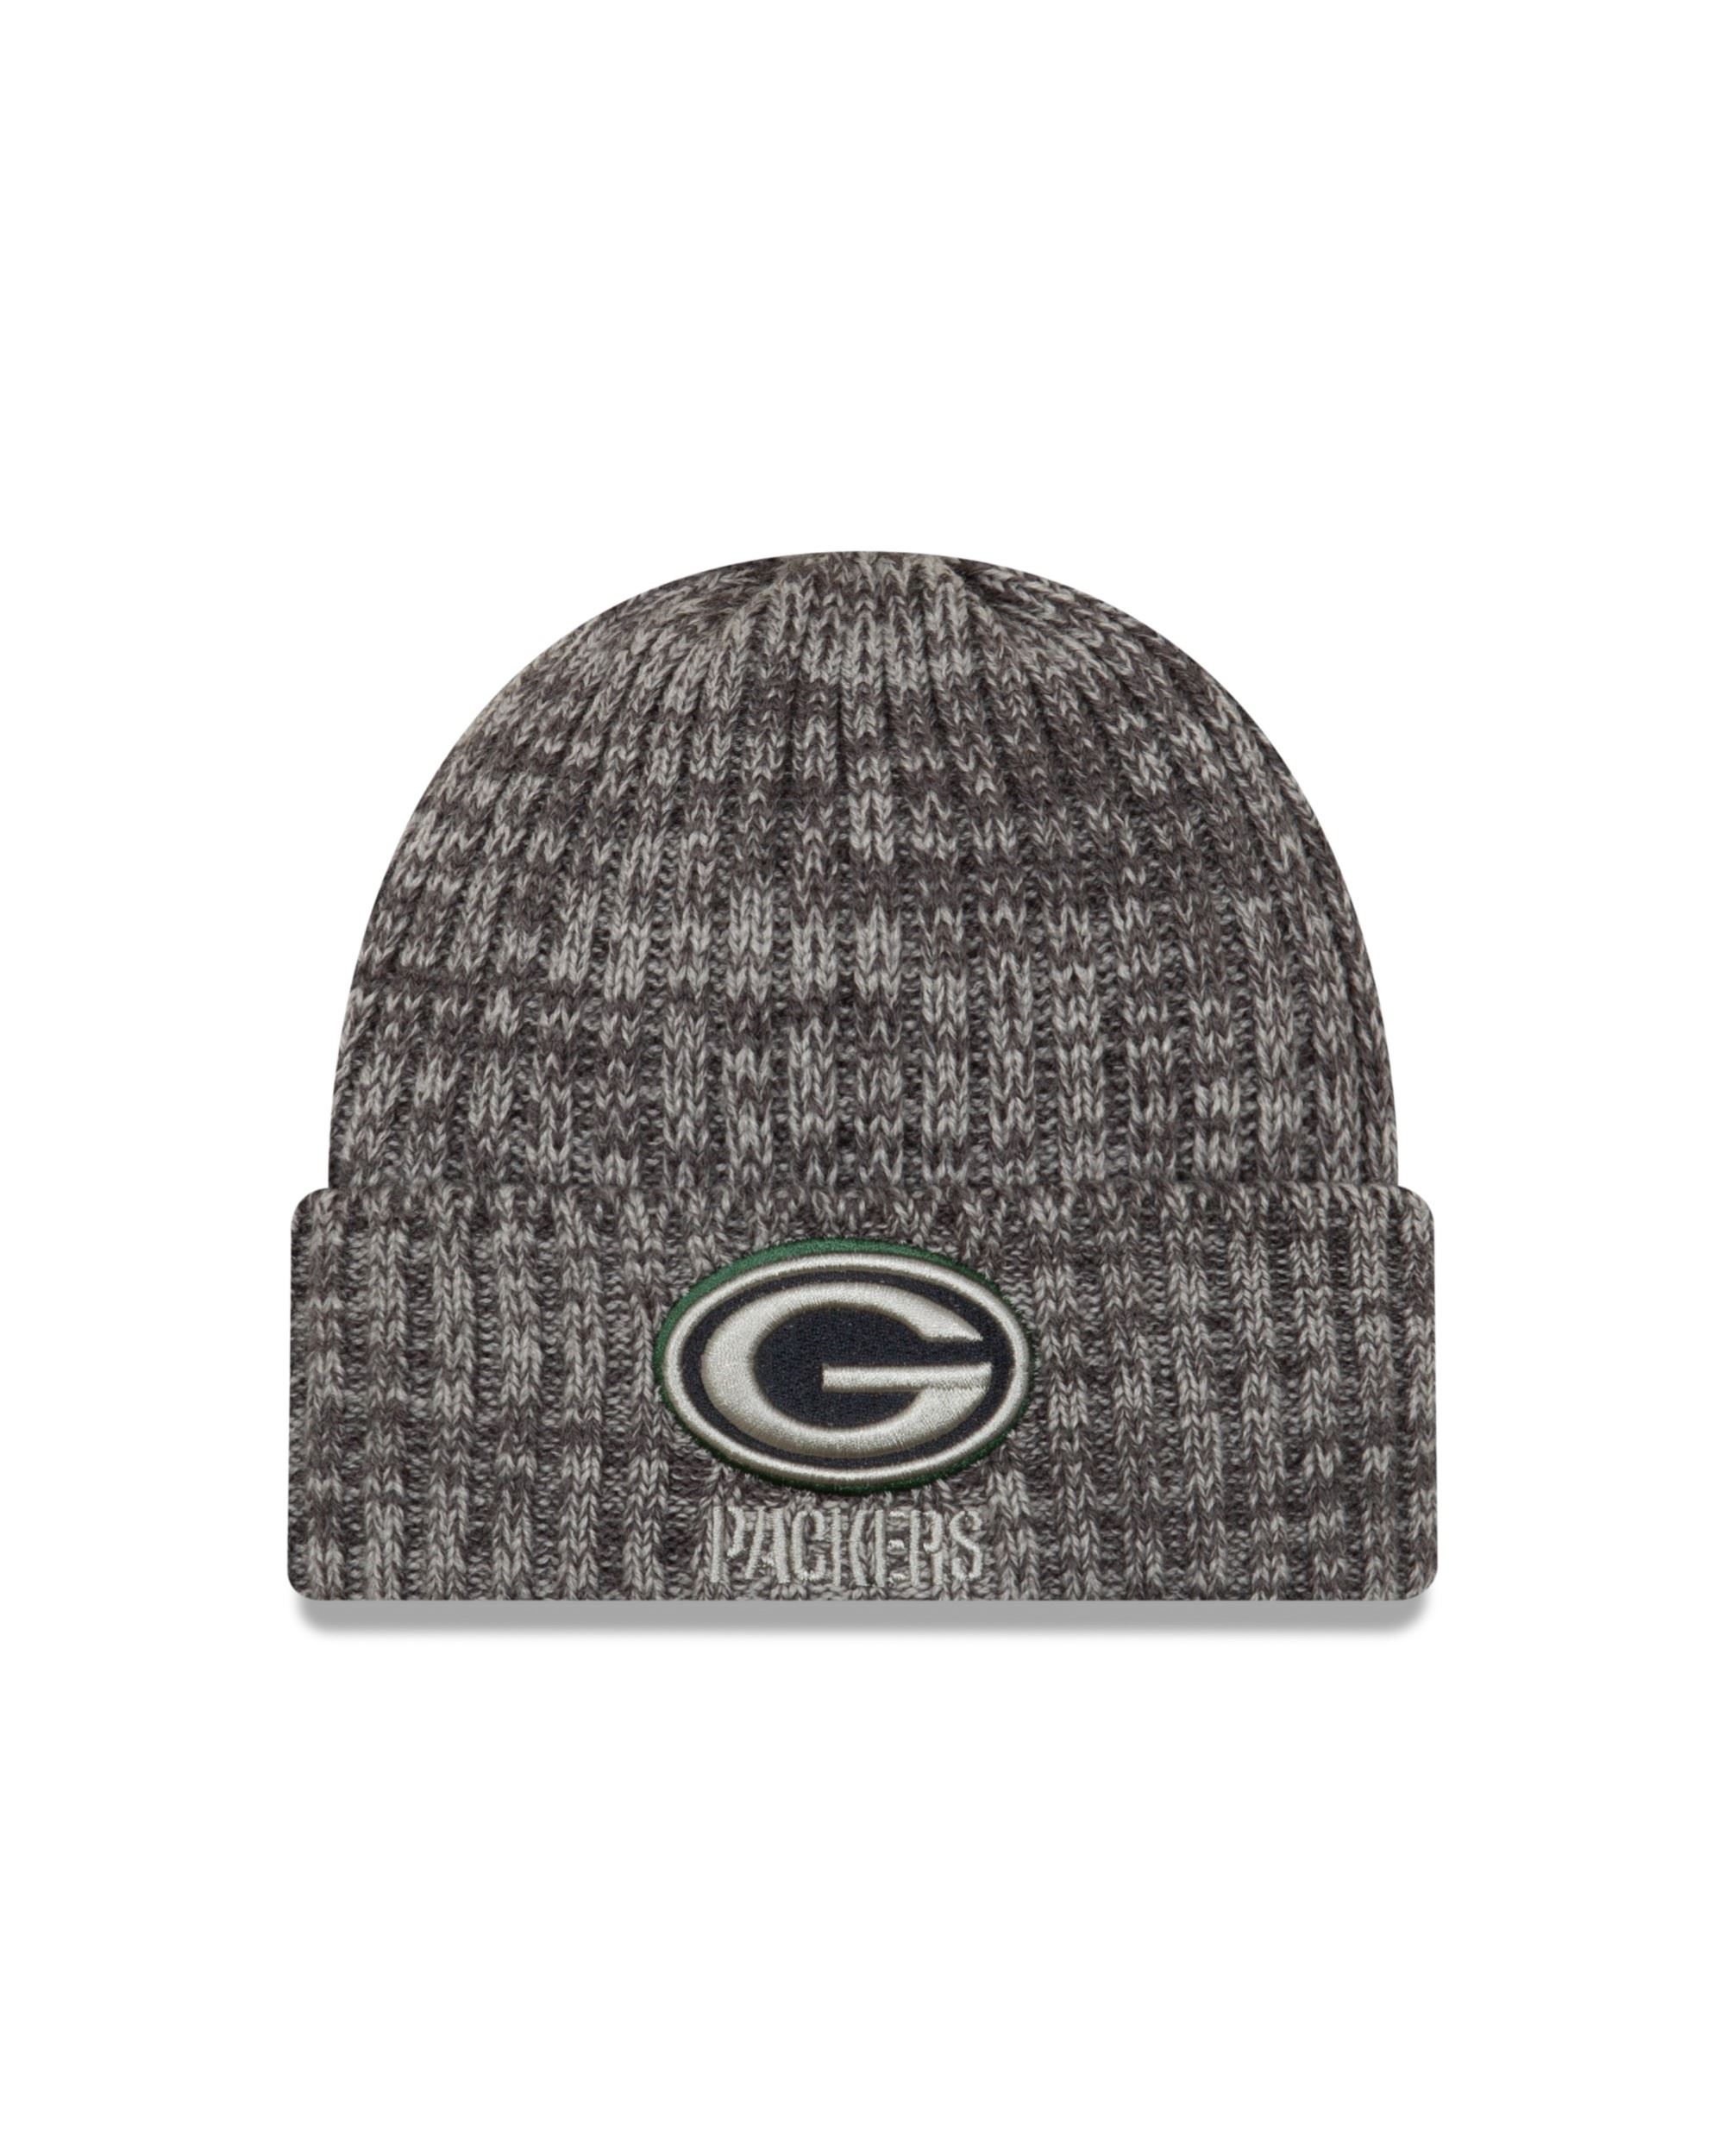 Green Bay Packers NFL 2019 On Field Crucial Catch Beanie New Era